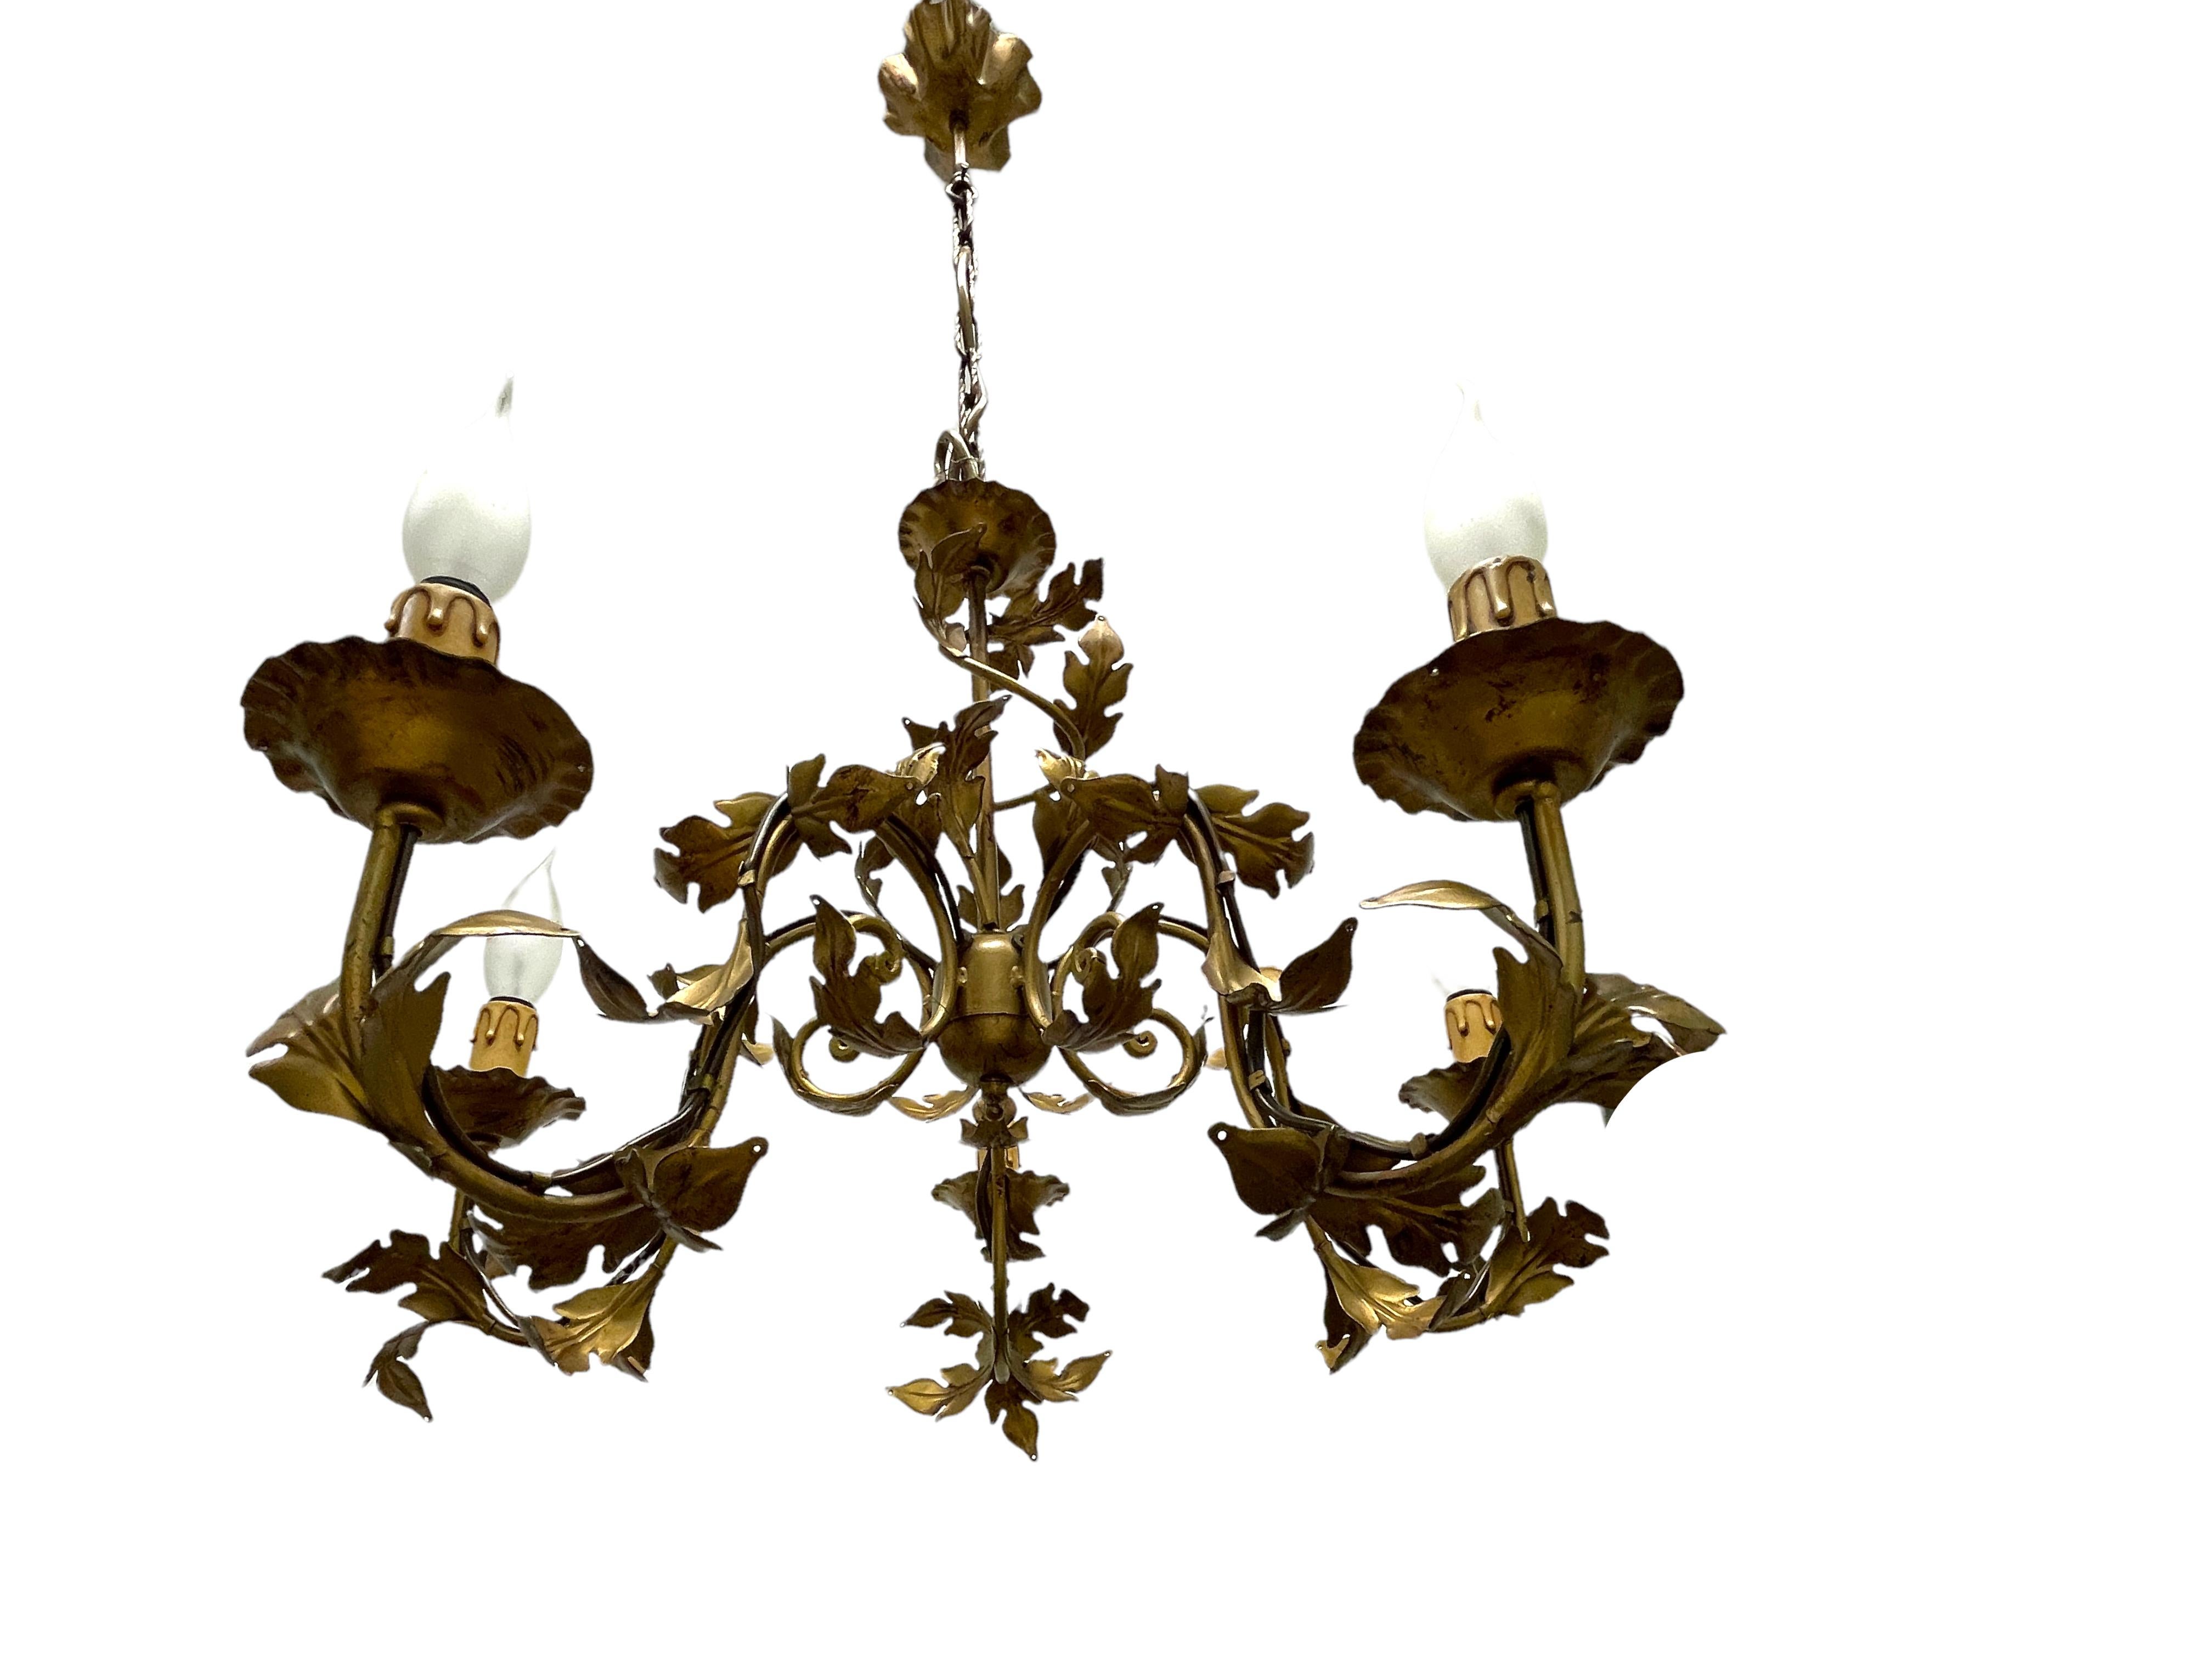 Beautiful Leaf Five-Light Tole Hollywood Regency Chandelier Gilded, Italy, 1960s For Sale 1